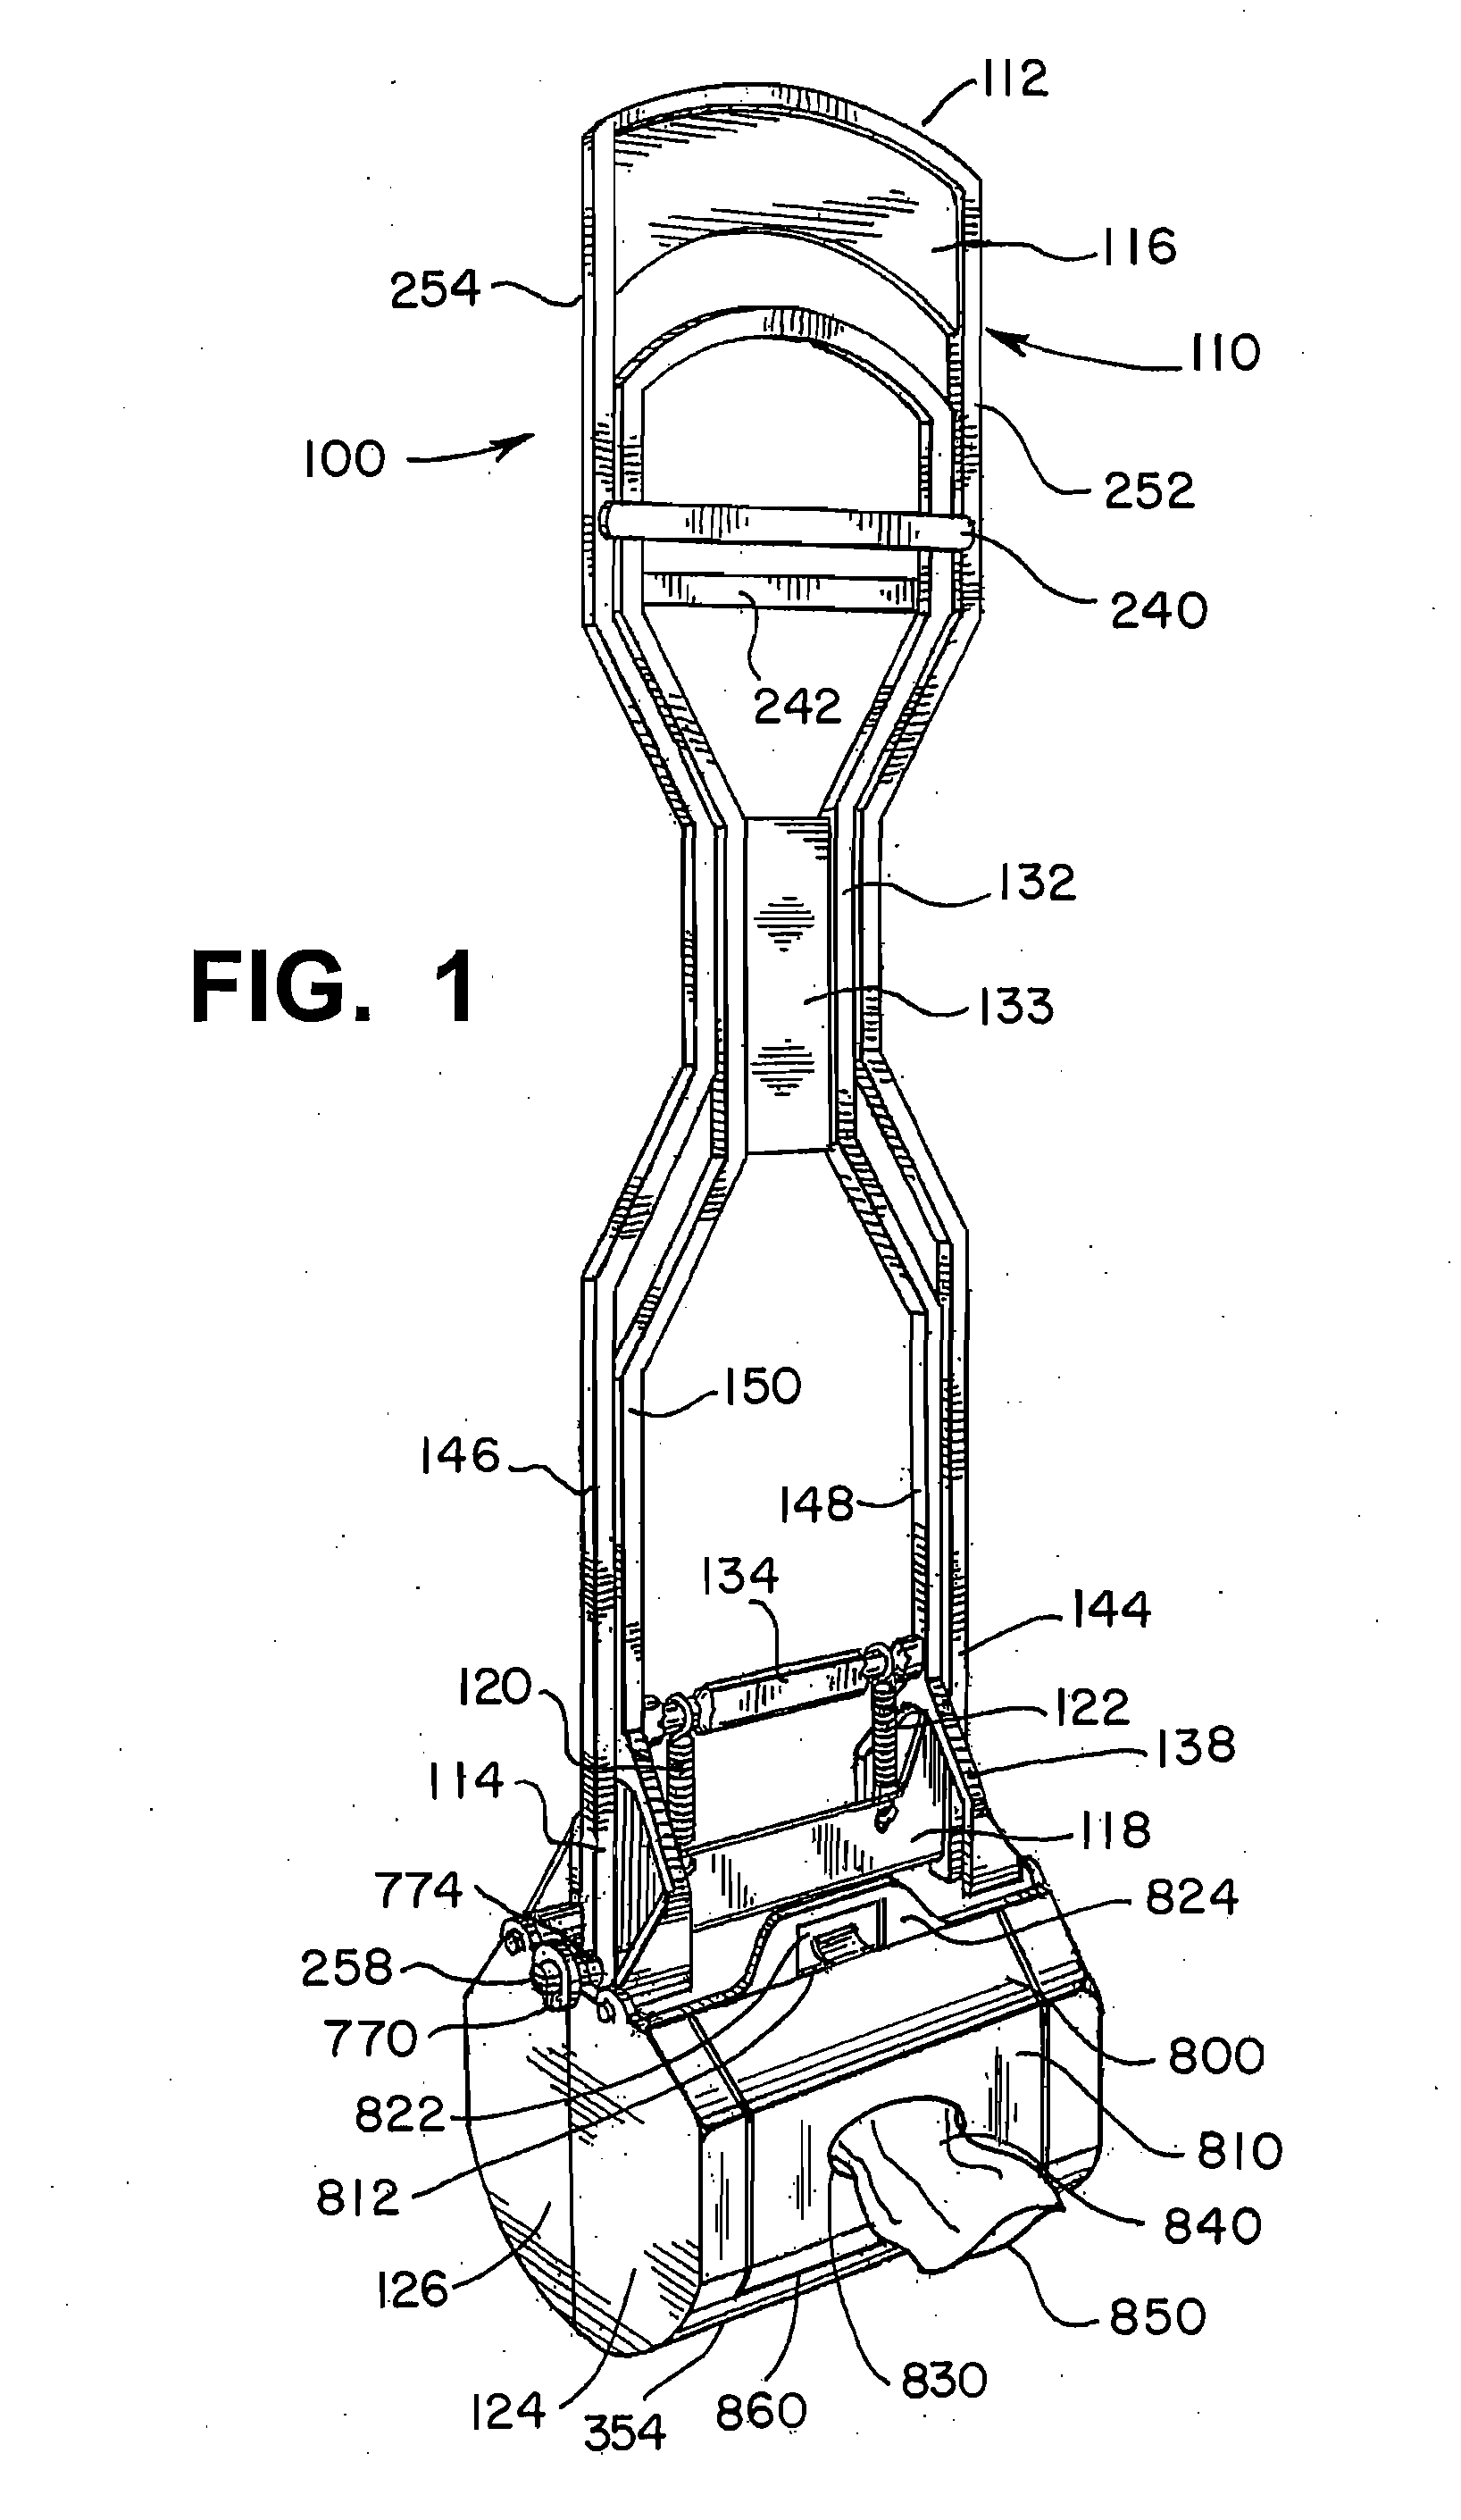 Animal waste collection device with integrated bag dispenser